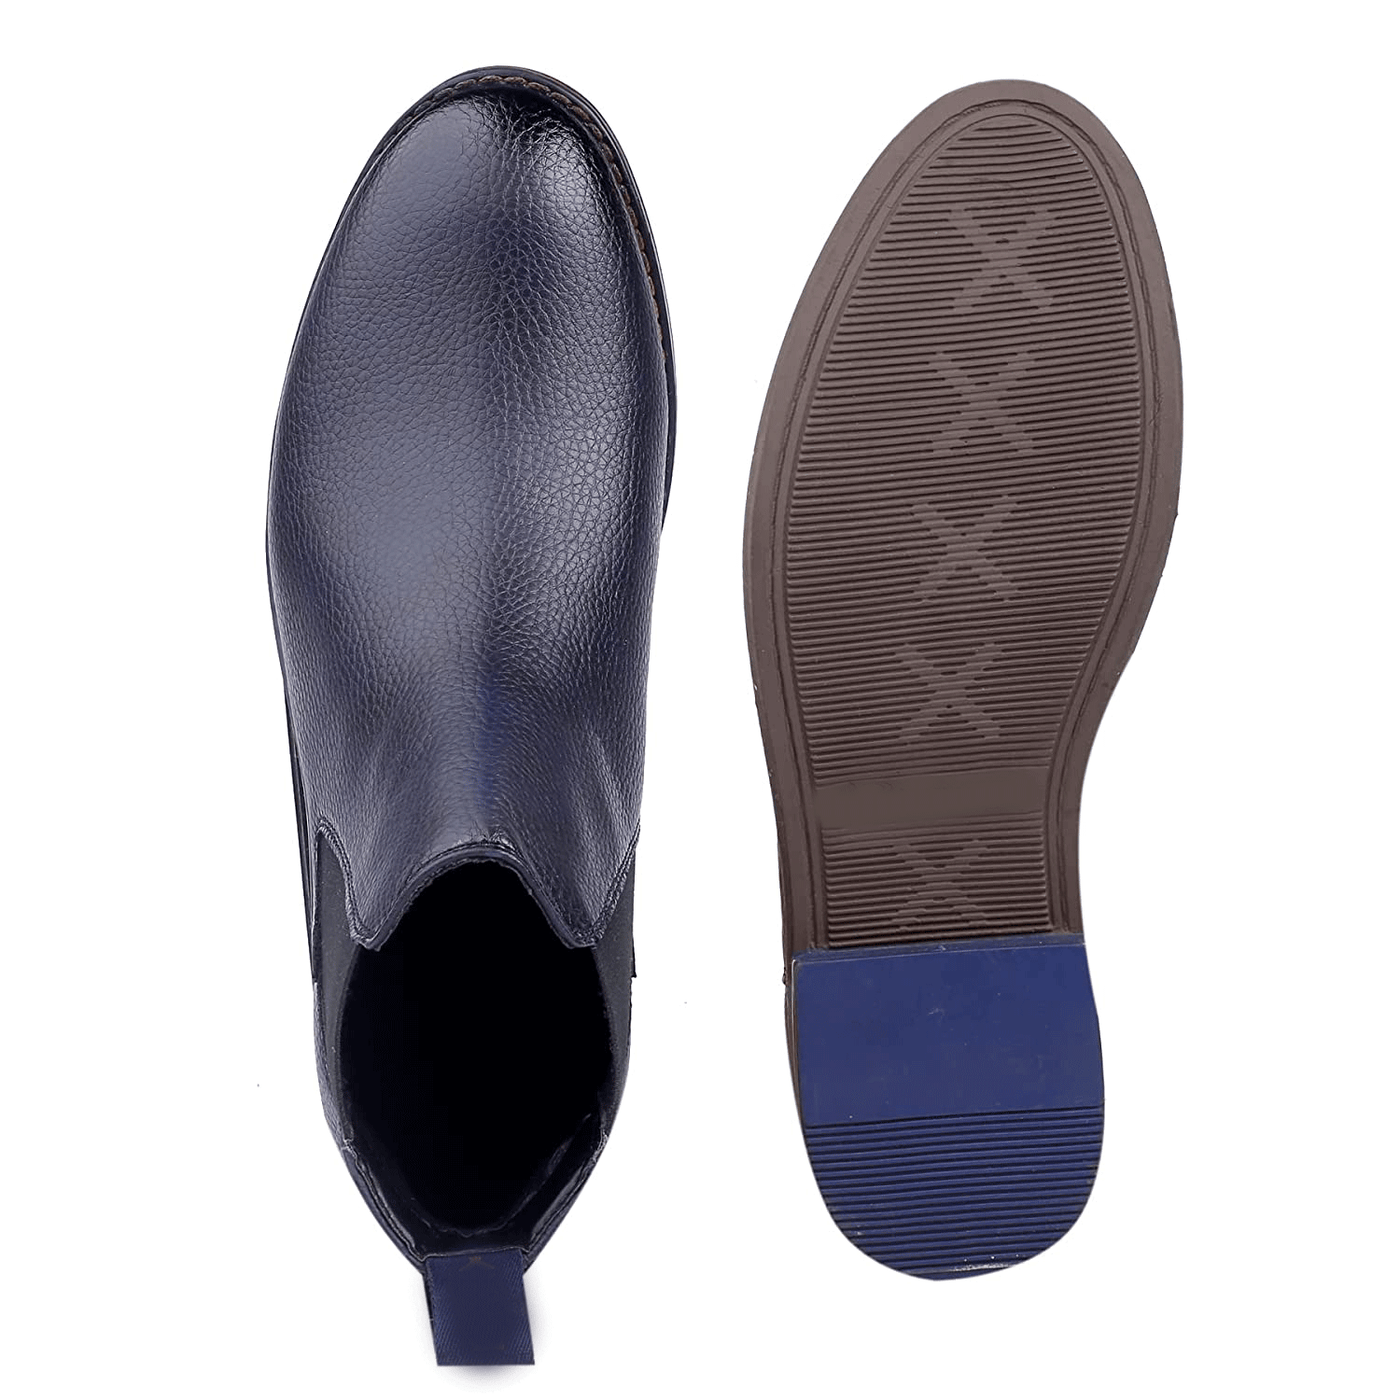 Classy Ankle British Design Blue Chelsea Boots For Men-Unique and Classy